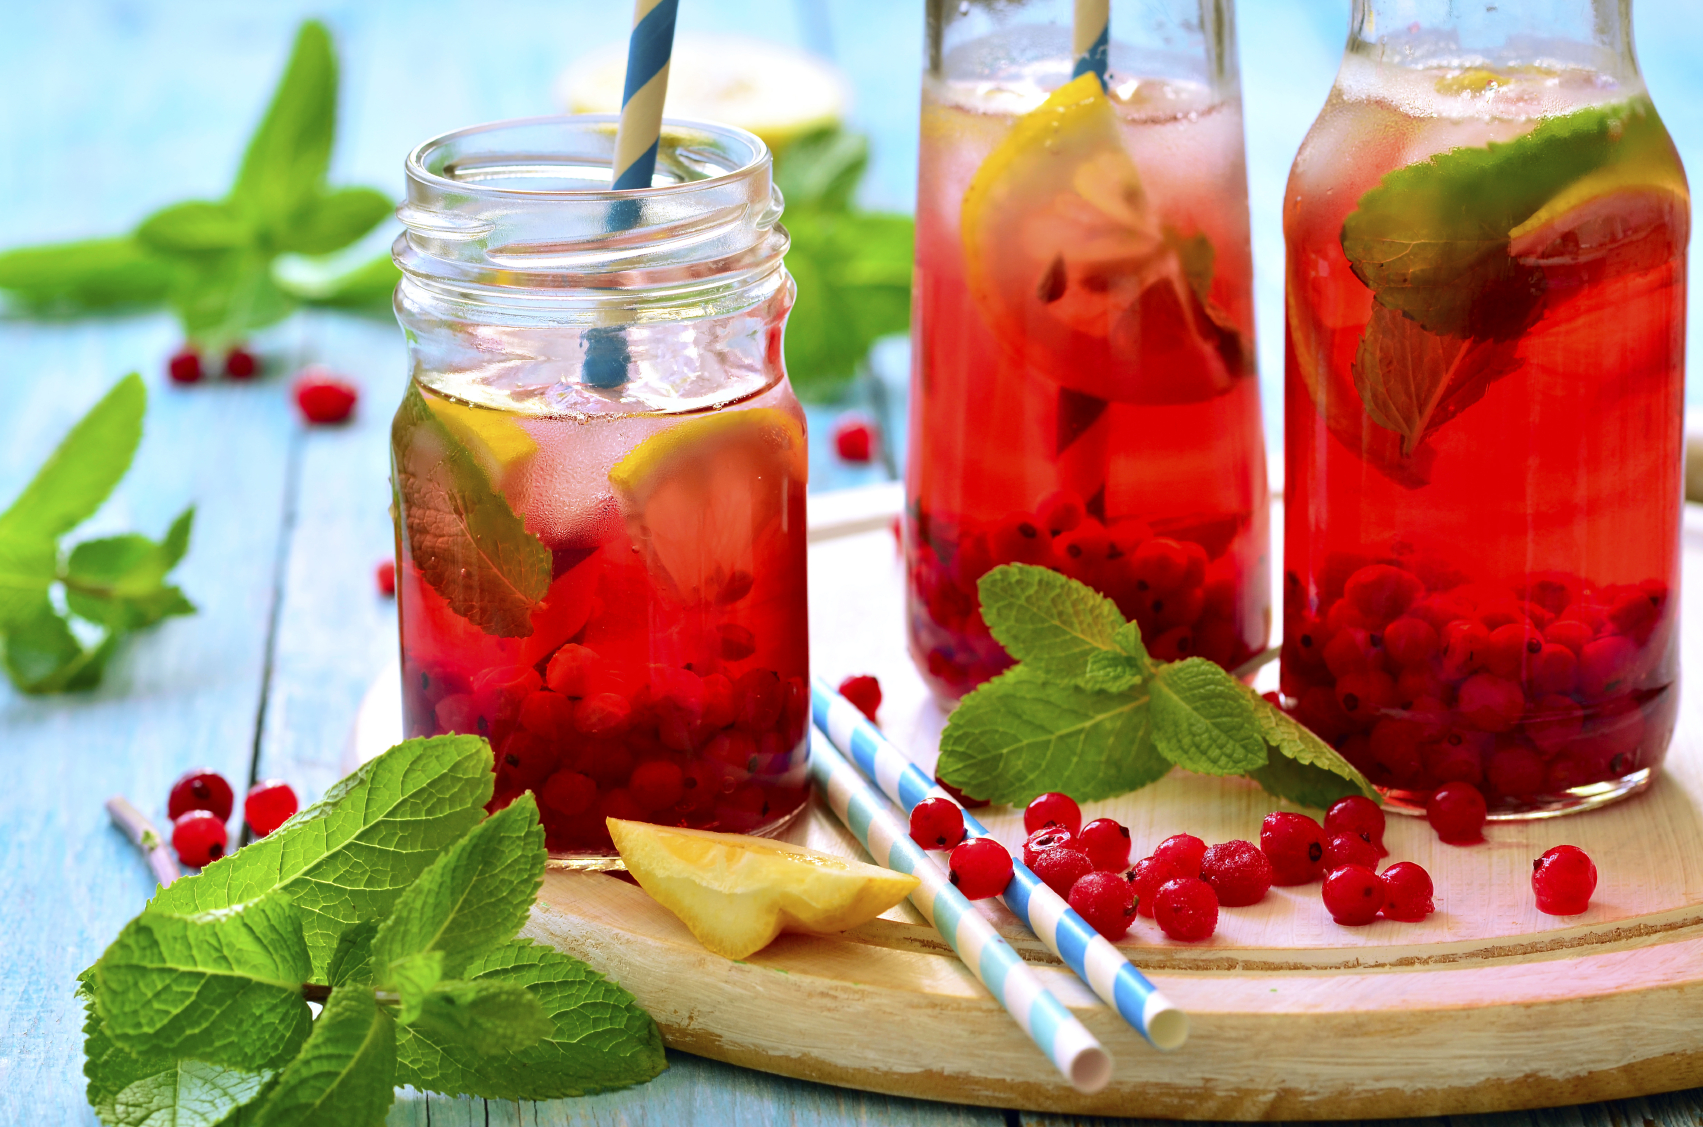 Cold redcurrant tea with lemon and mint in a glass jar.